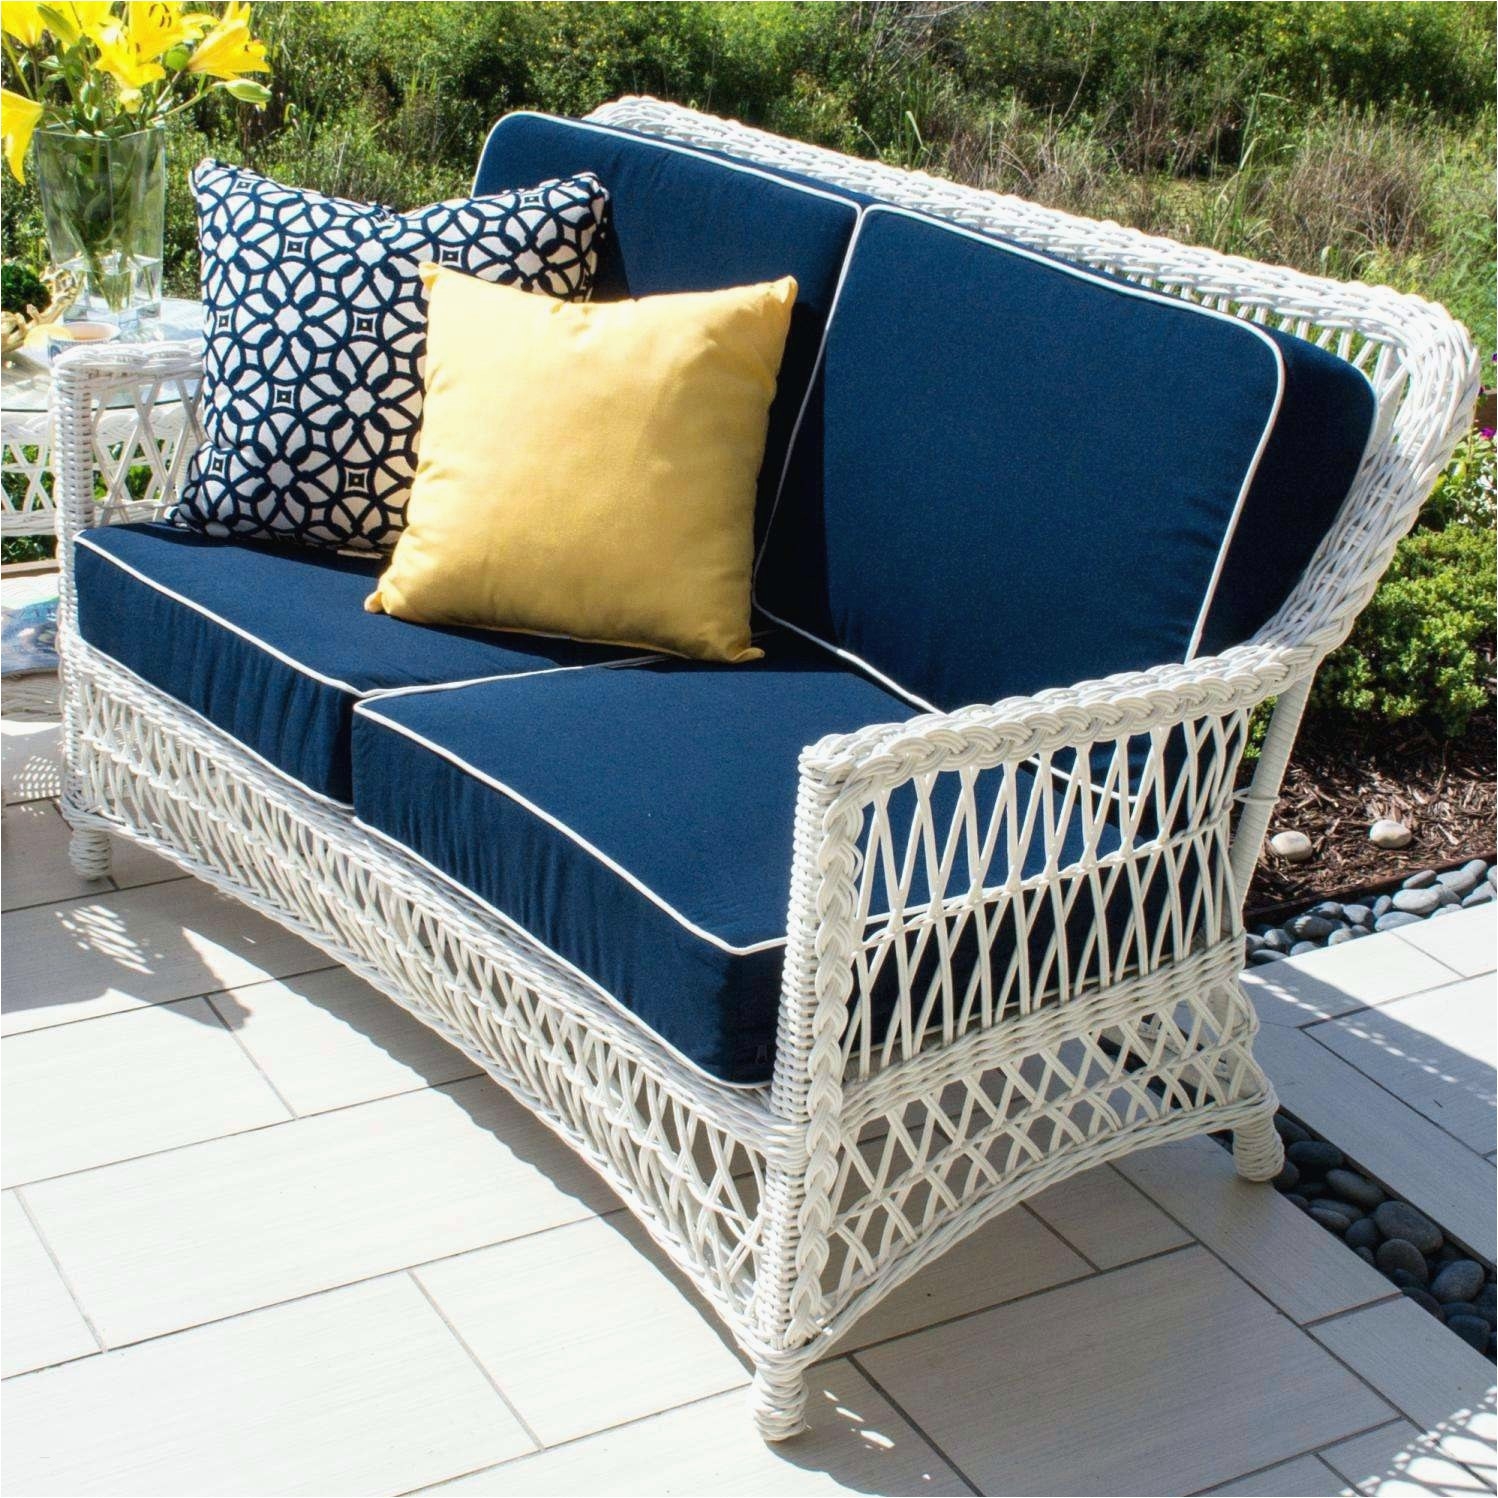 renetti sofa frisch patio cover ideas awesome wicker outdoor sofa 0d this image outdoor furniture repair near me